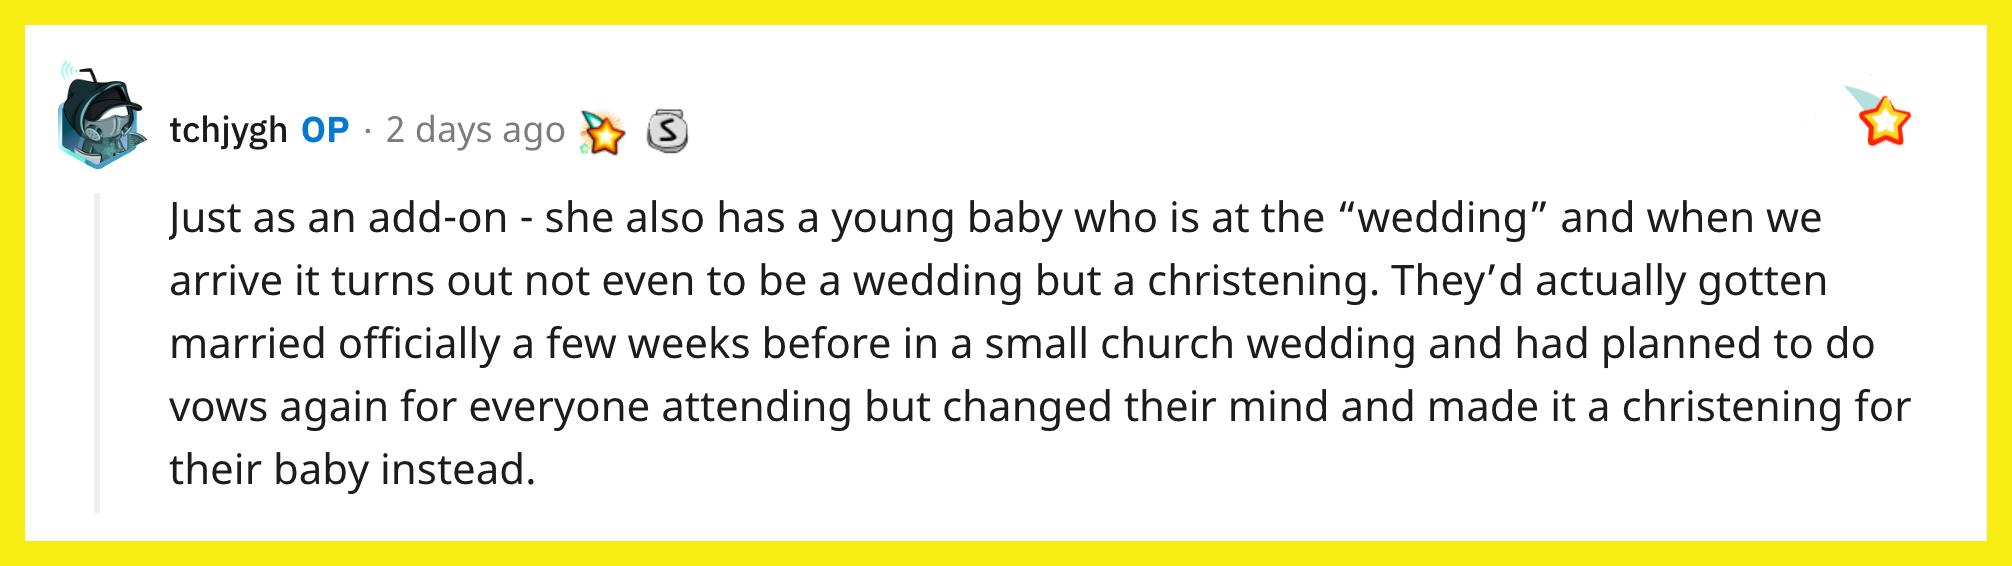 The OP later revealed the wedding was actually a christening.